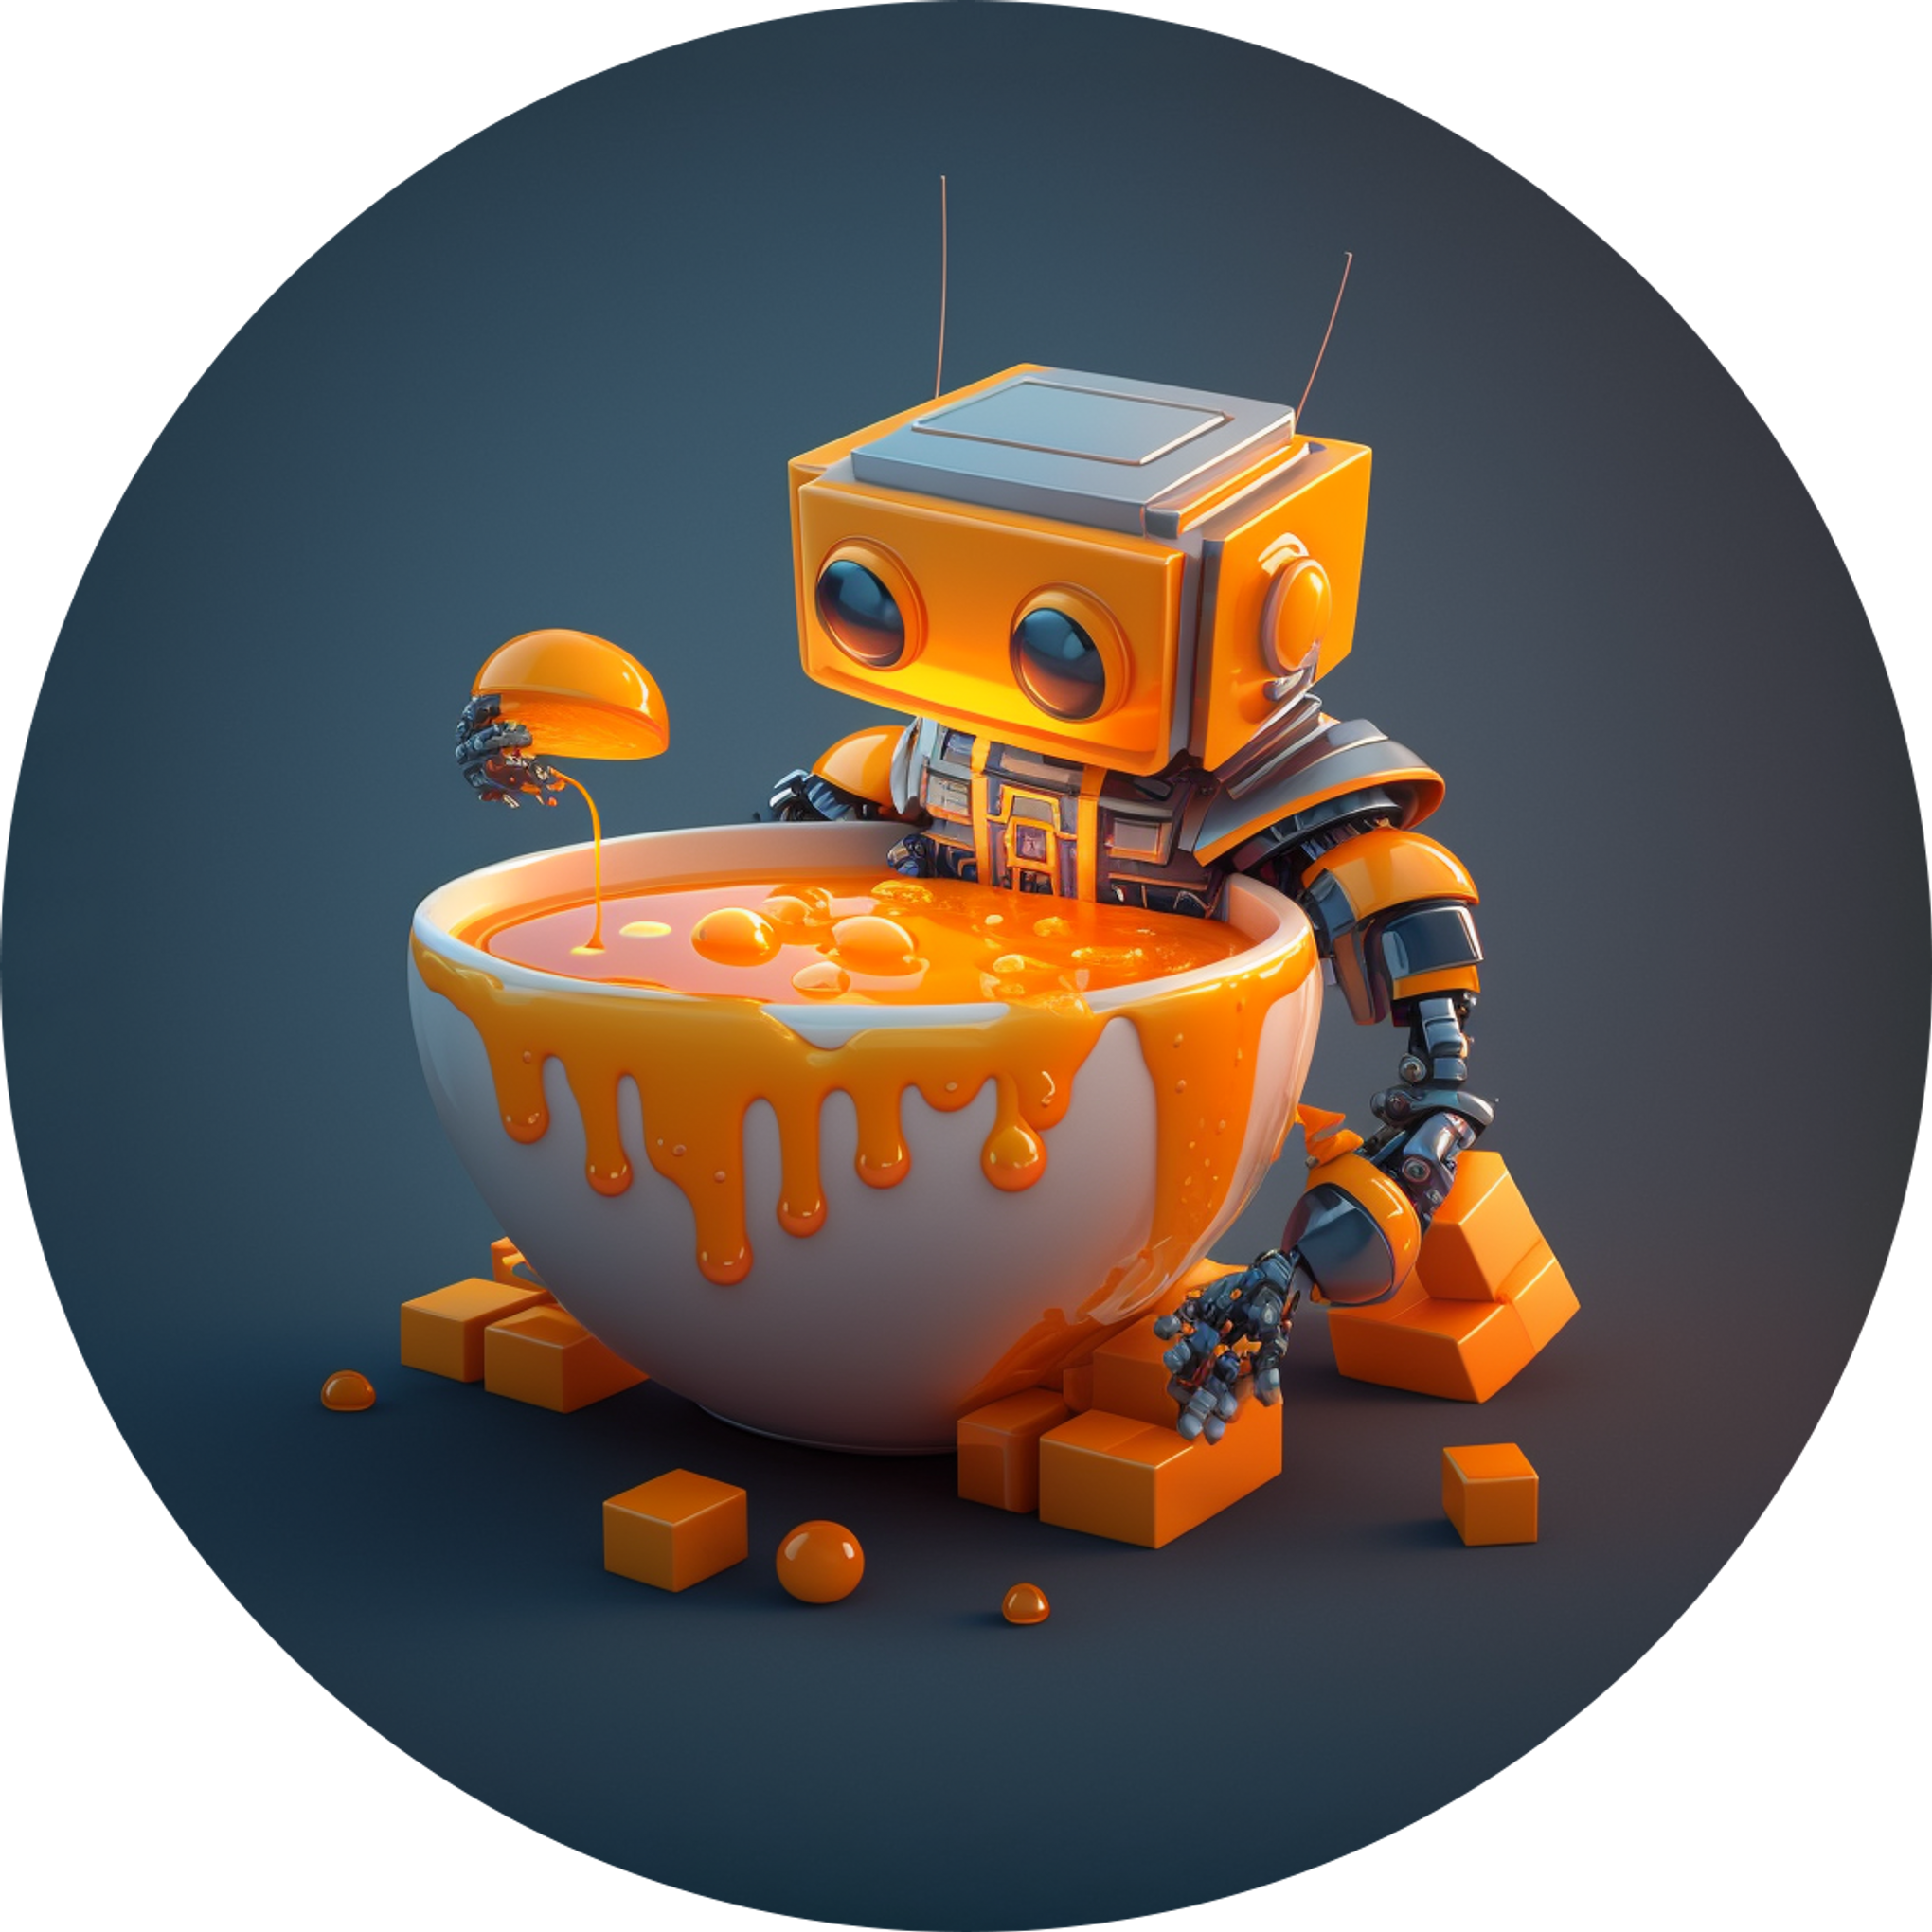 Robot eating yummy jelly